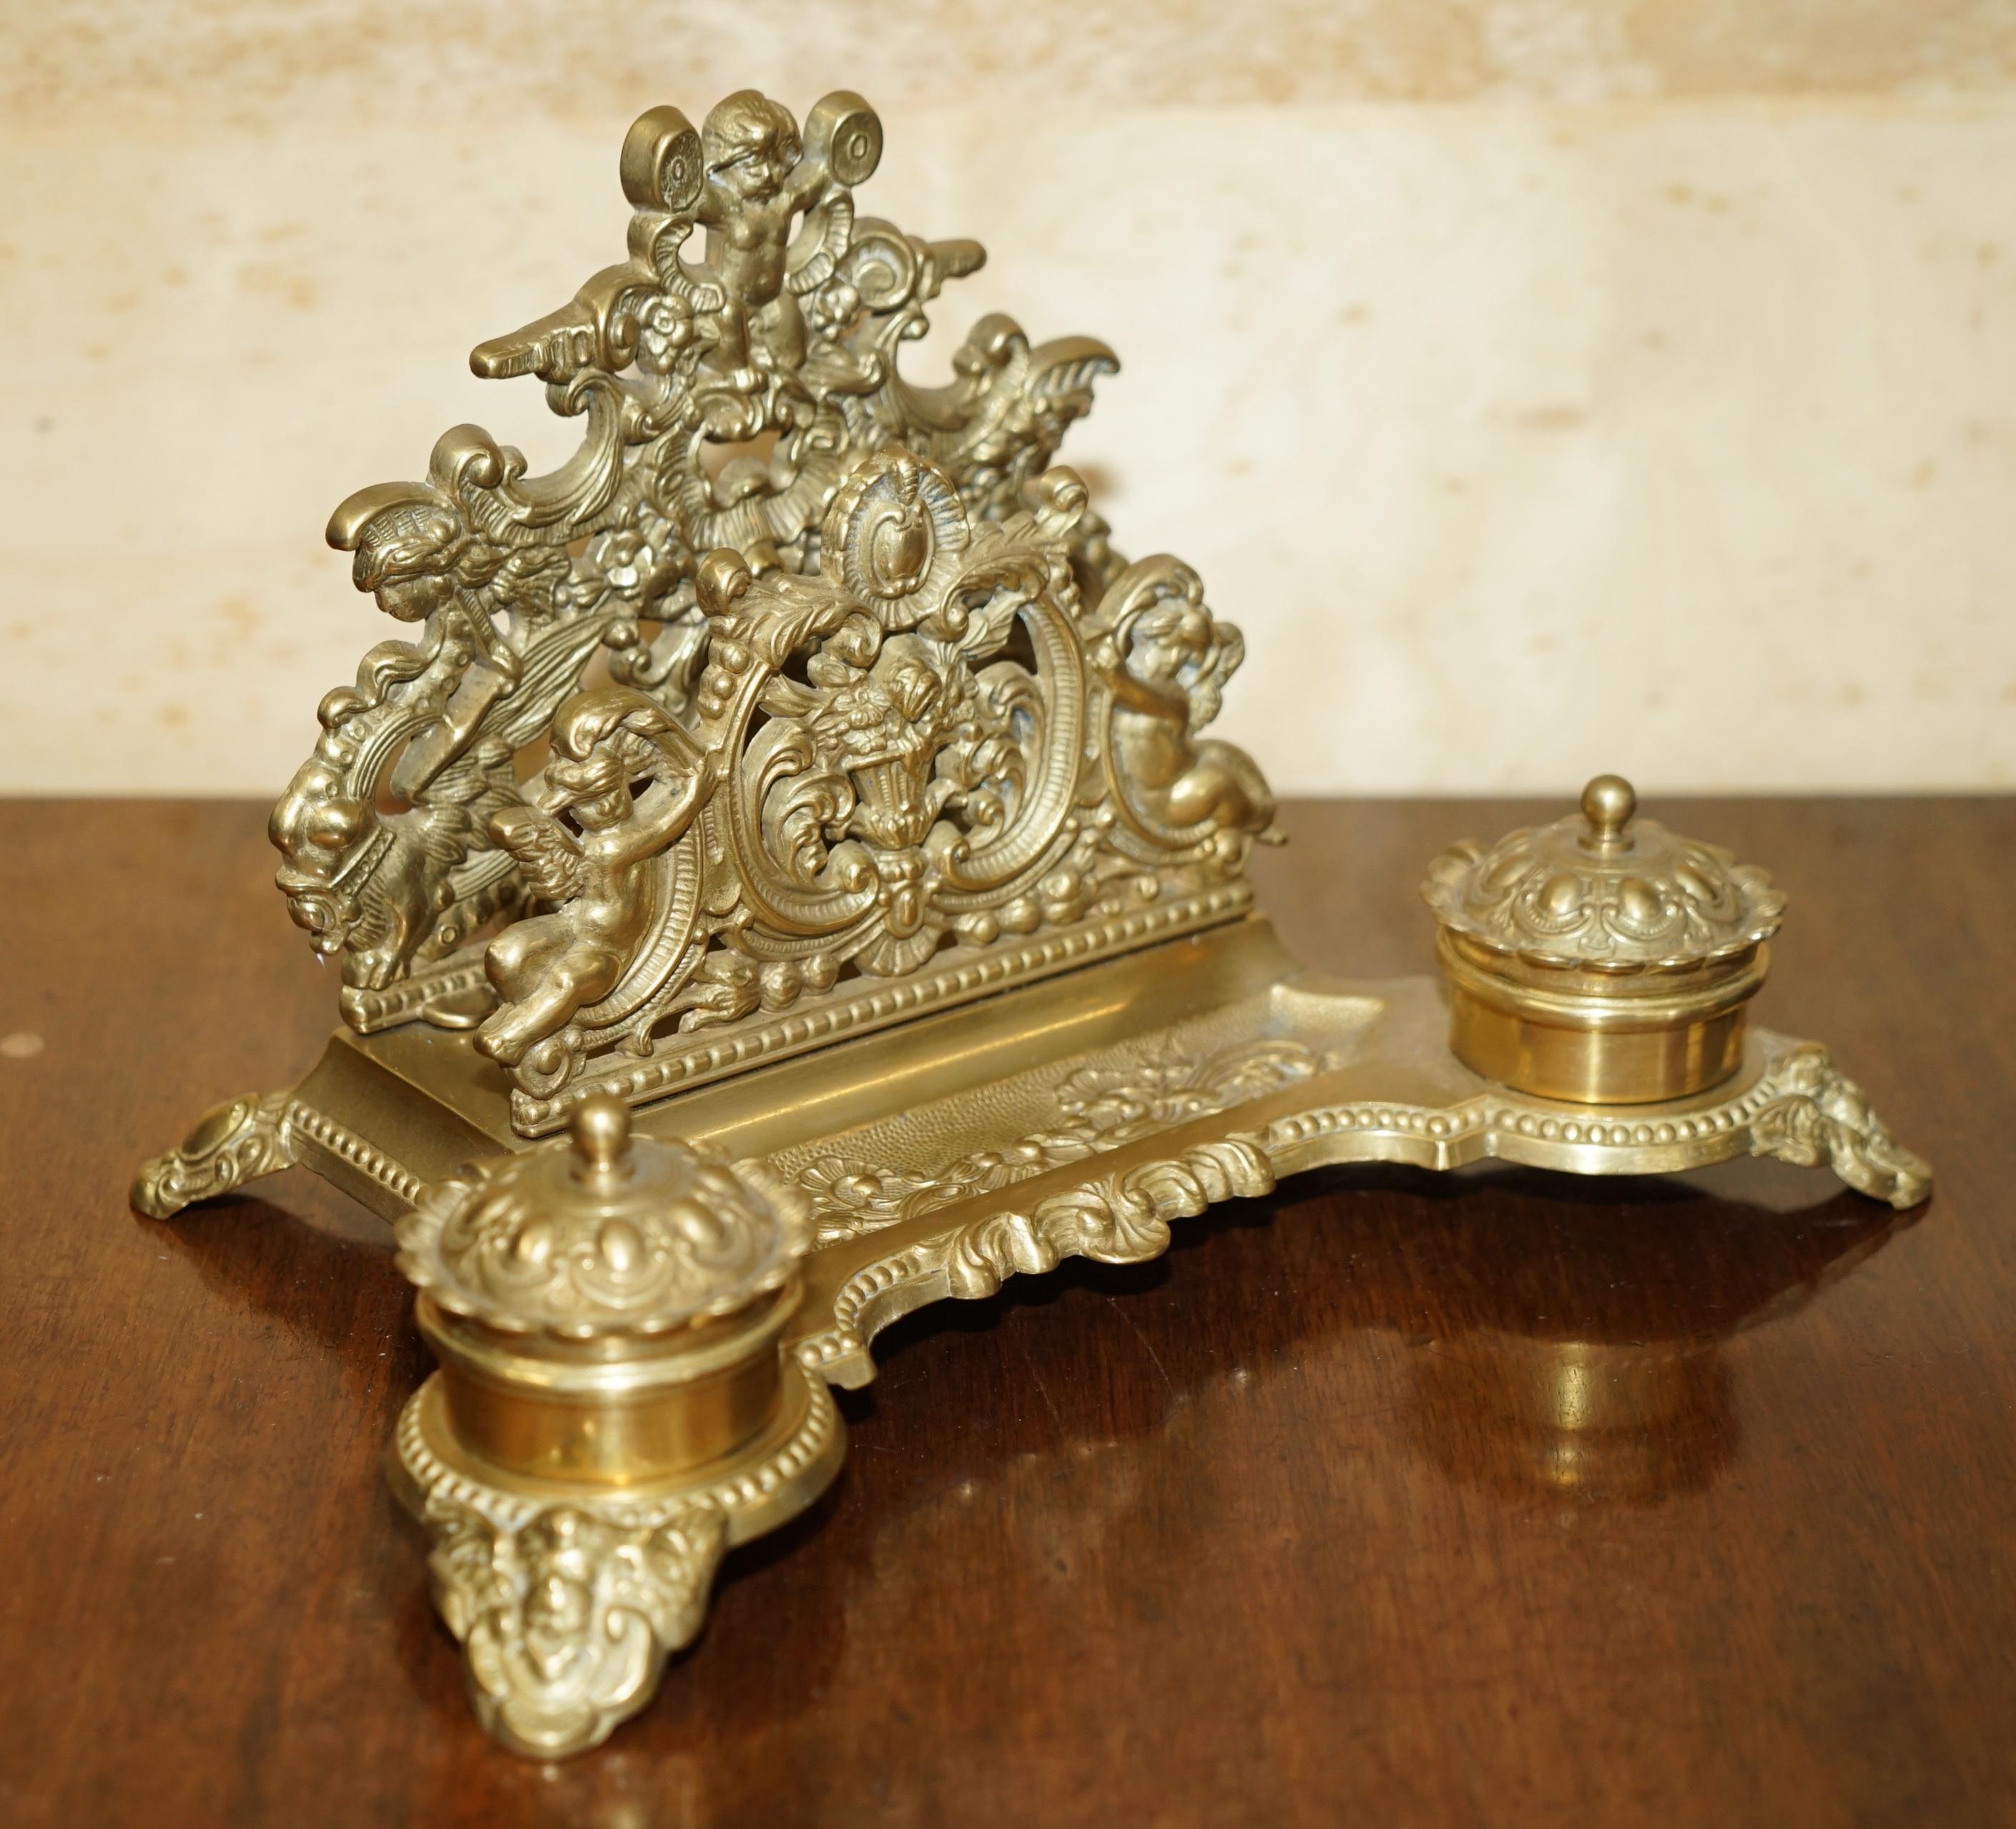 Royal House Antiques

Royal House Antiques is delighted to offer for sale this lovely antique French Baroque Repoussé gilt brass Cherub ink well letter holder stand

A very decorative and well made thing, circa 1900 and

The condition is perfect for